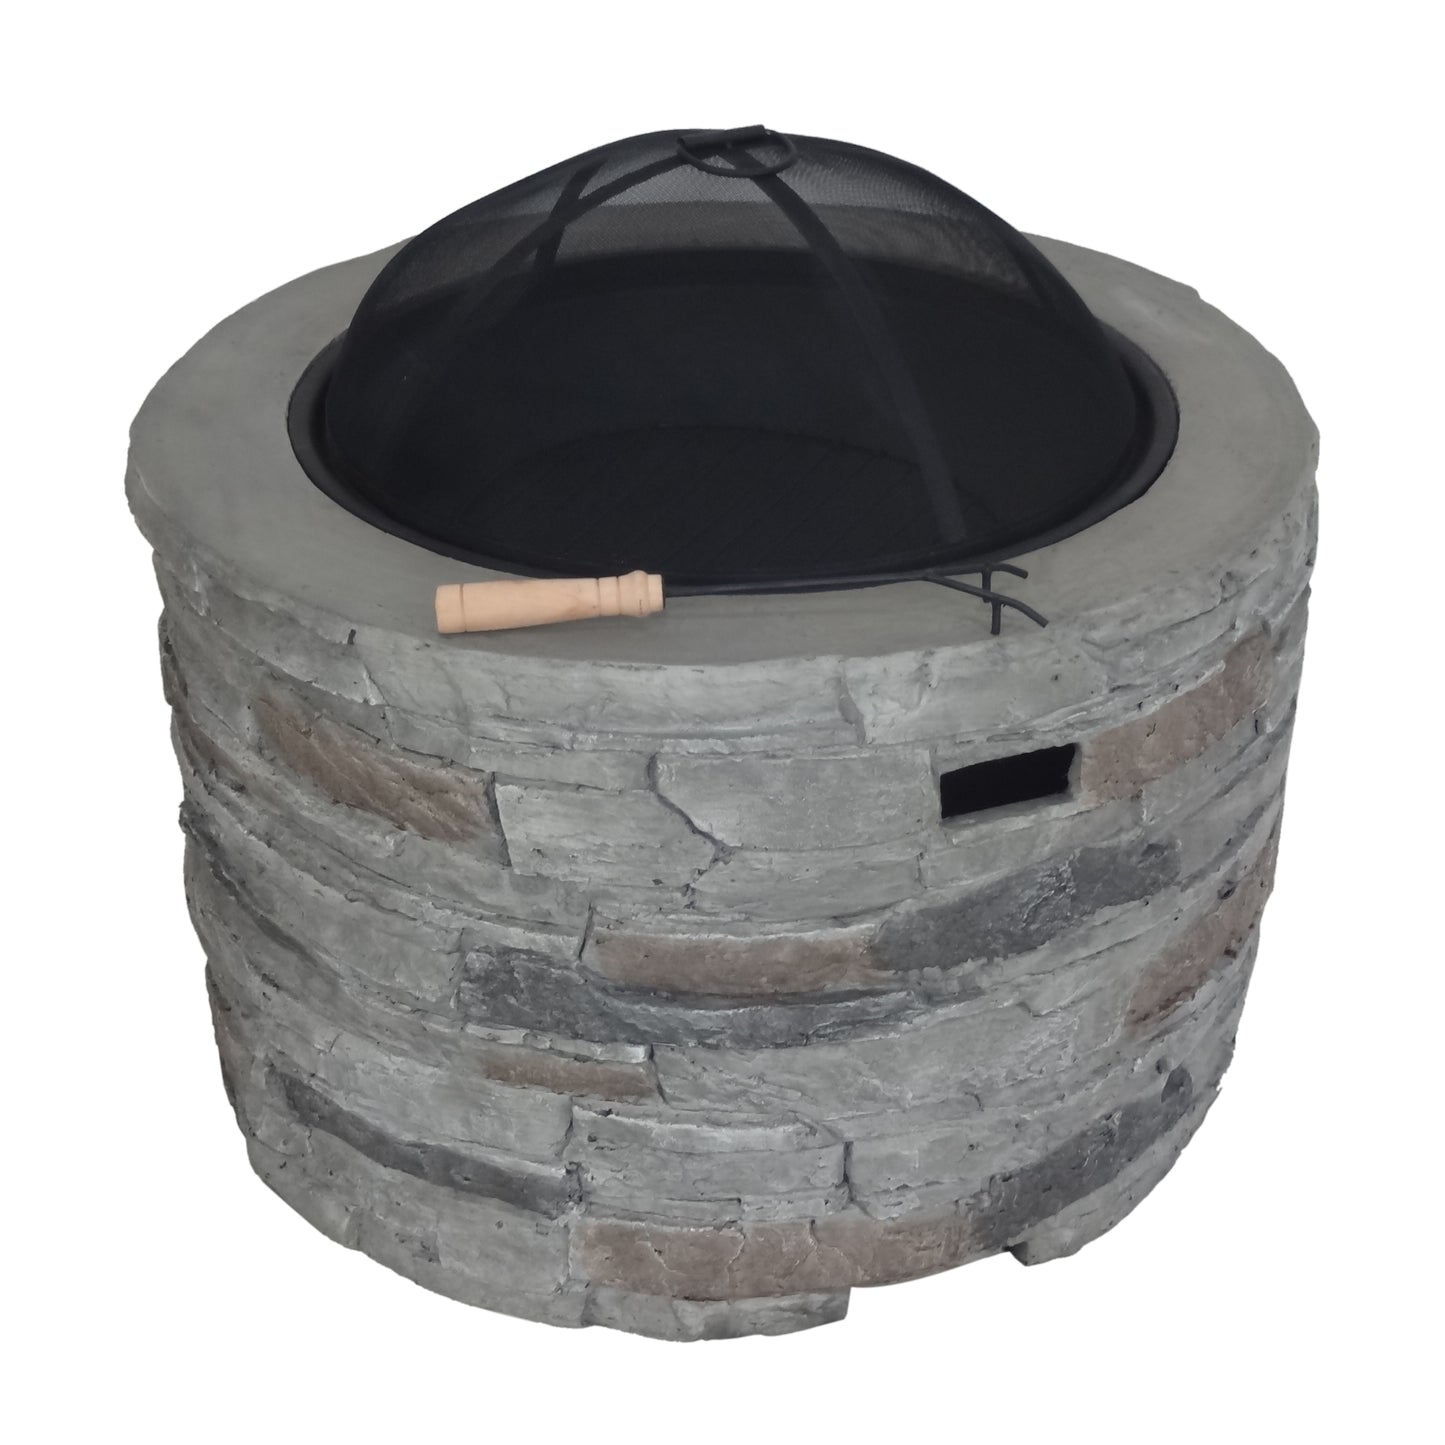 Dione Outdoor 32-inch Wood Burning Light-Weight Concrete Round Fire Pit, Grey